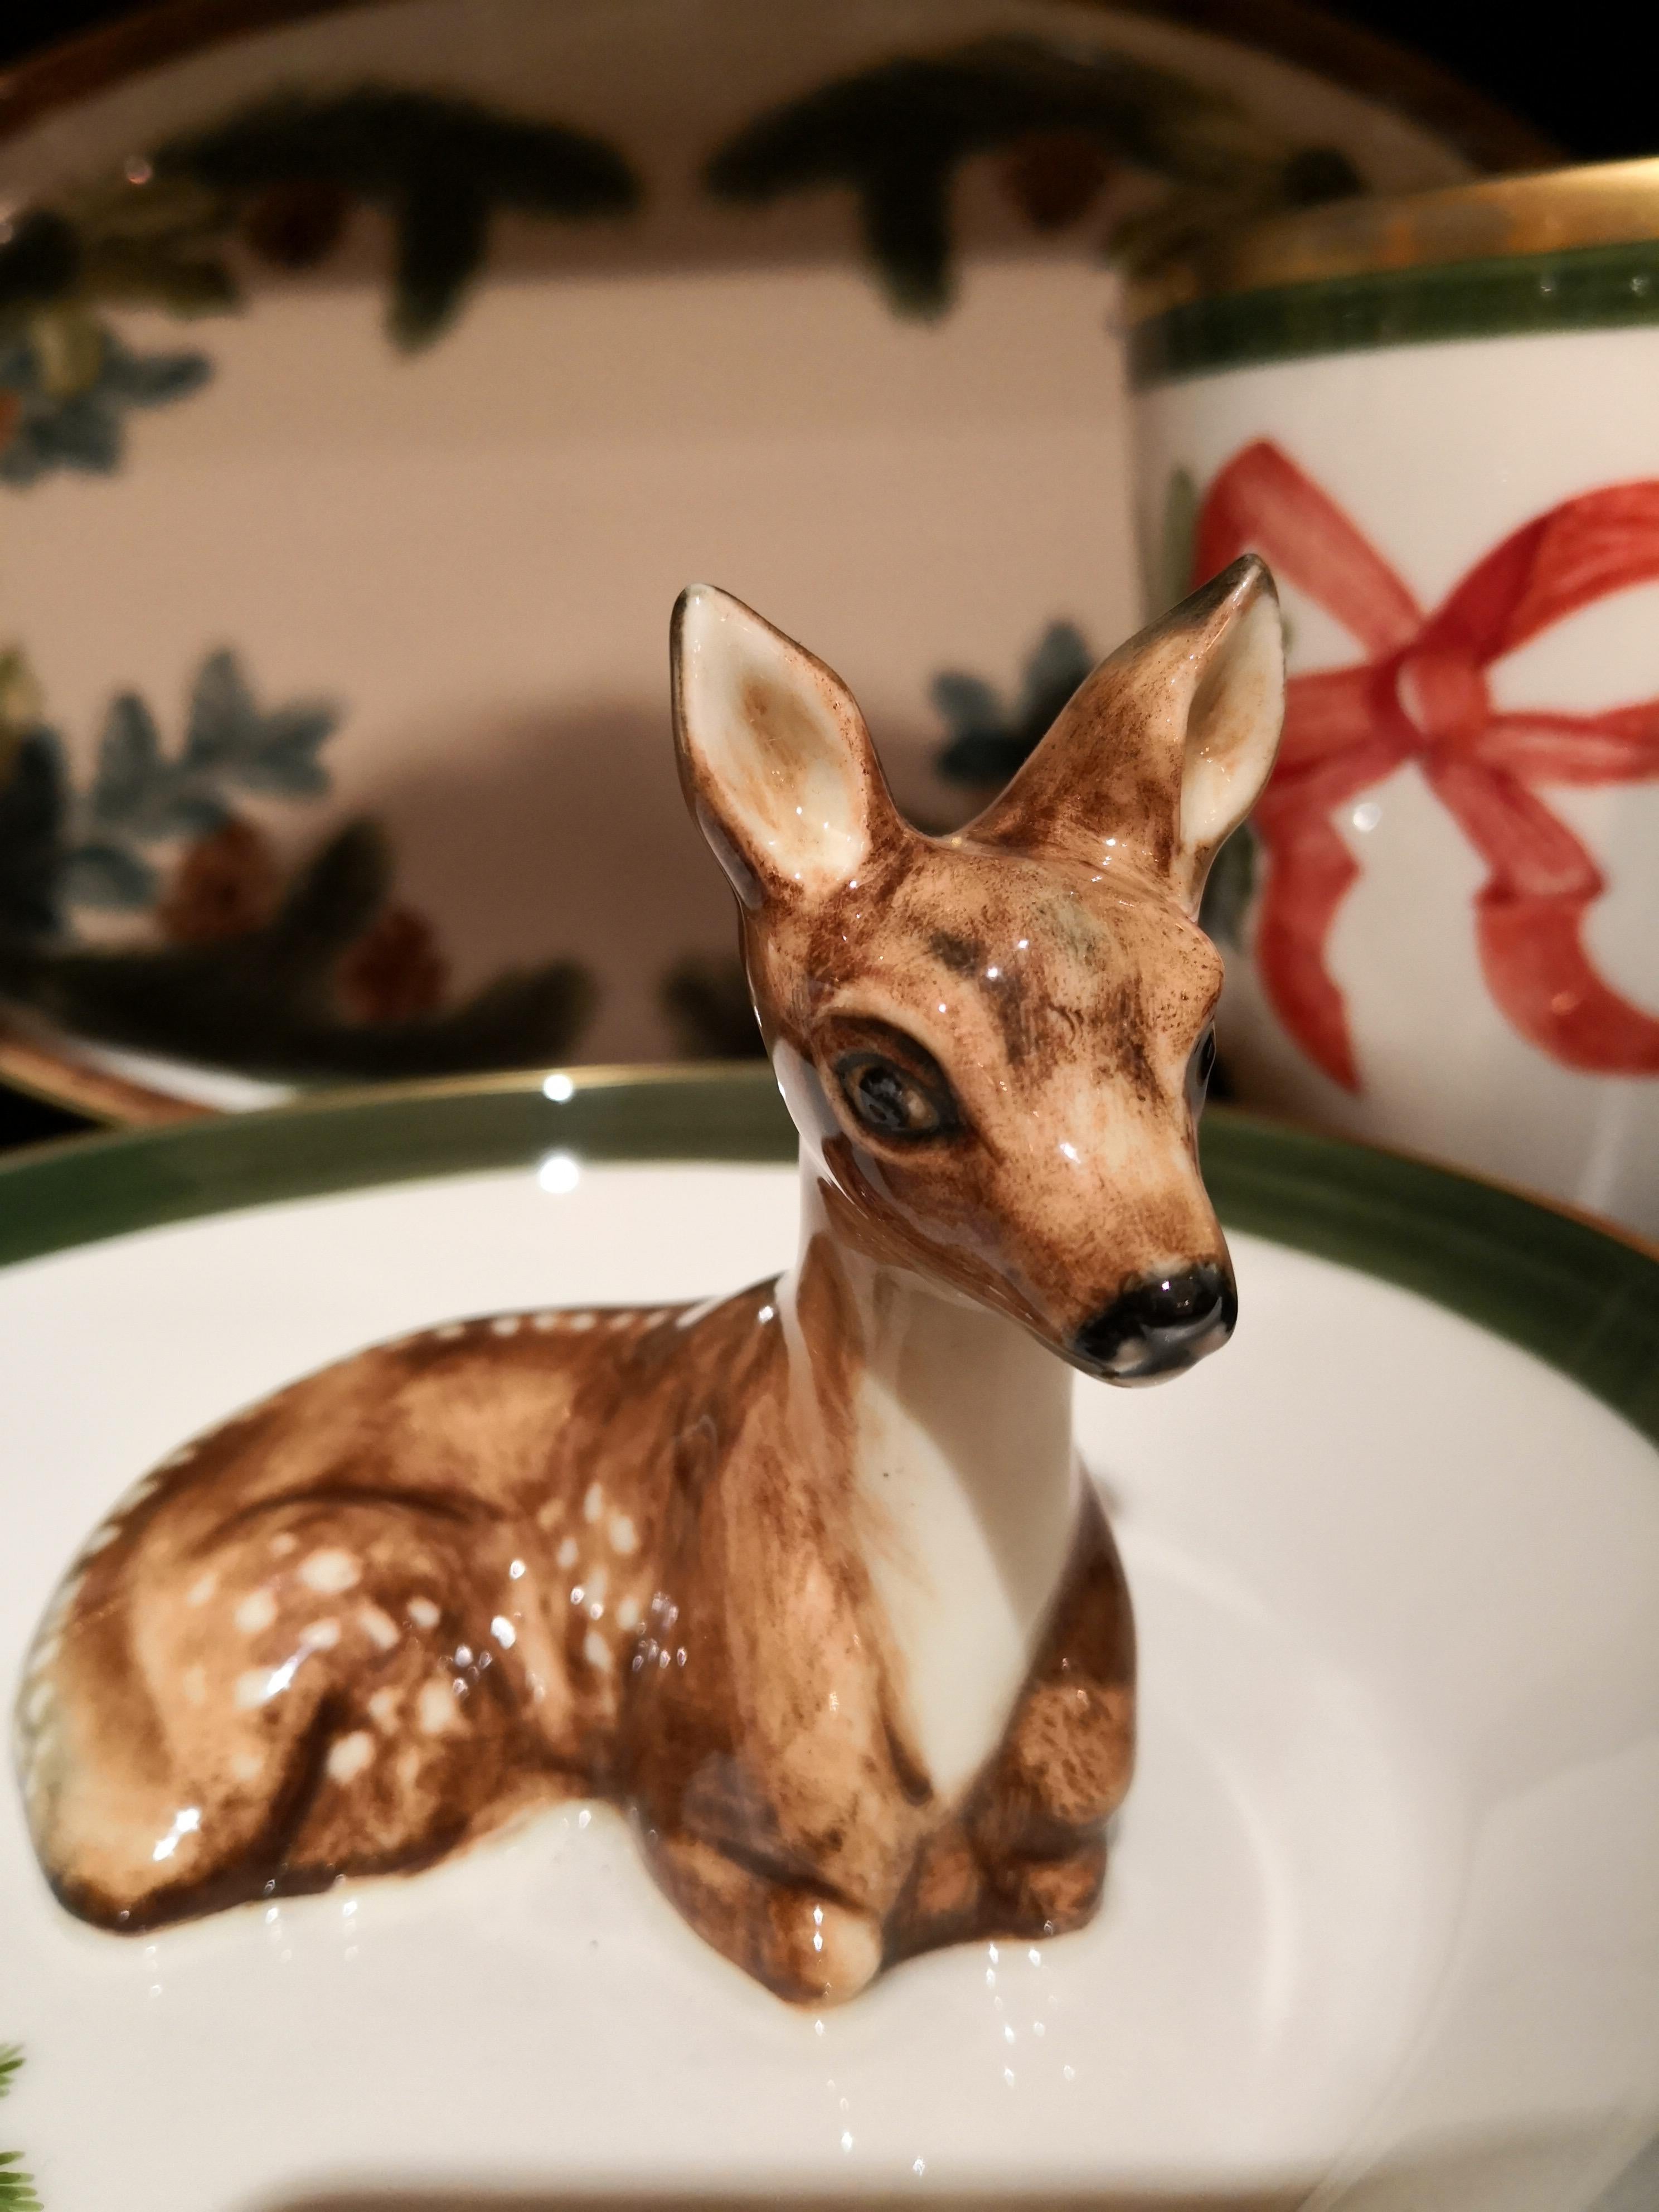 Black forest handmade porcelain bowl with a hands-free naturalistic painted bambi figure in brown in country style. The bambi is sitting in the middle of the bowl for decorating nuts or sweets around. Rimmed with a fine 24-carat gold line. Handmade